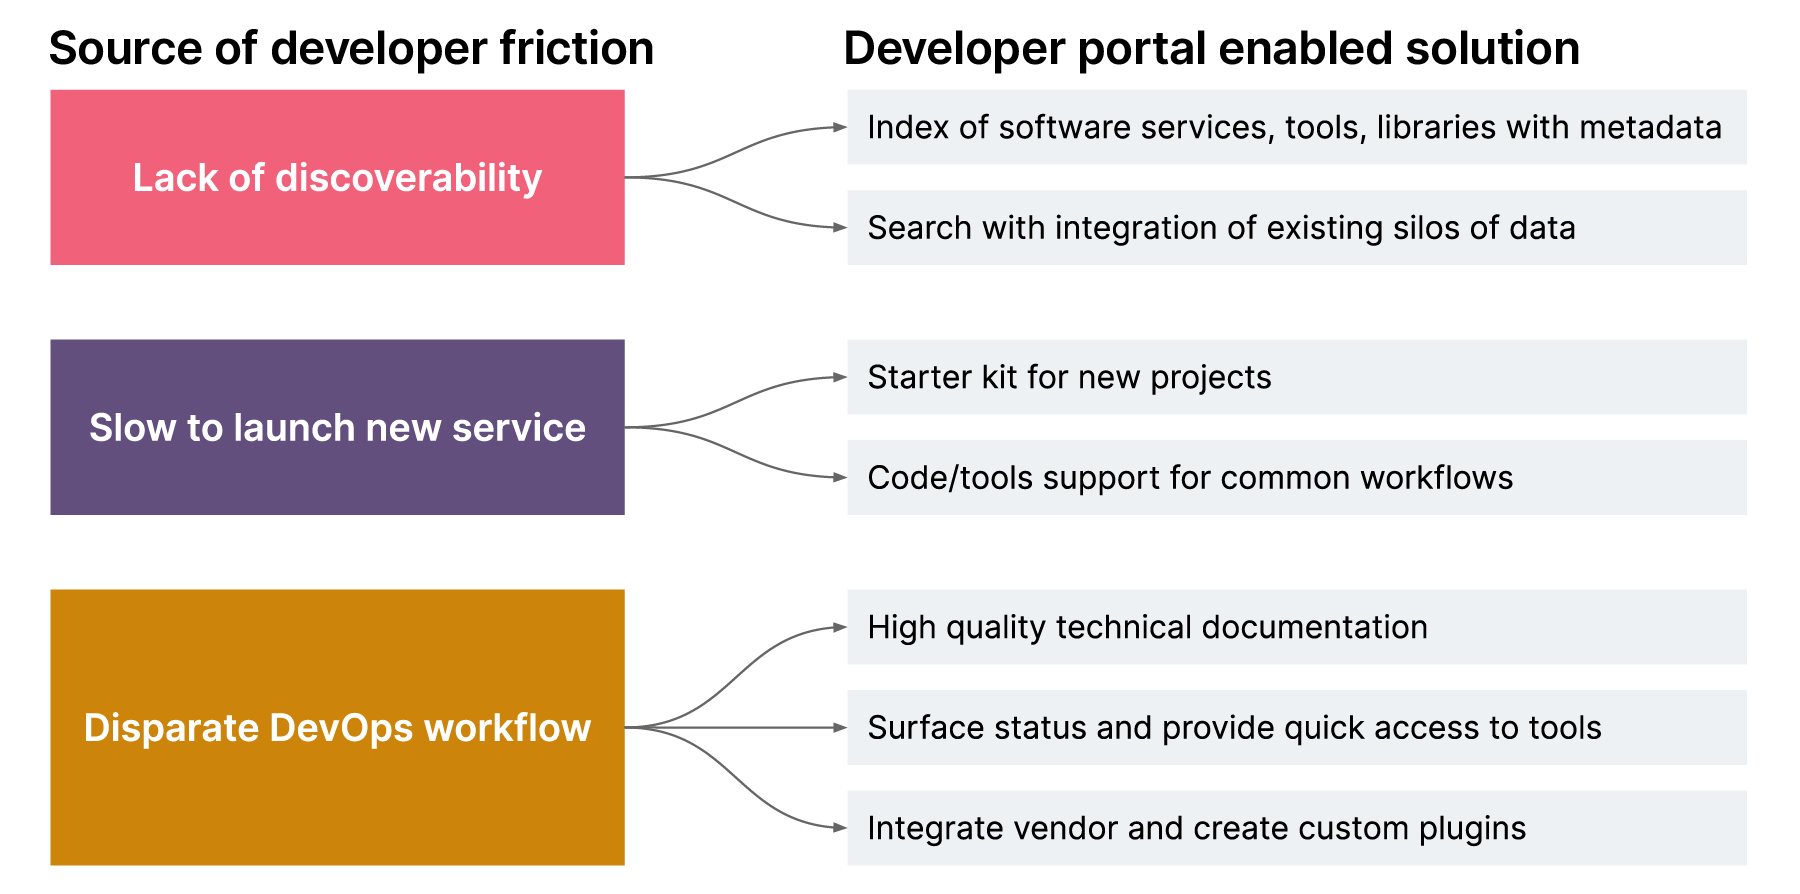 Sources of developer friction include lack of discoverability, slow to launch new service, and disparate DevOps workflow. Developer portals enables solutions for these frictions.